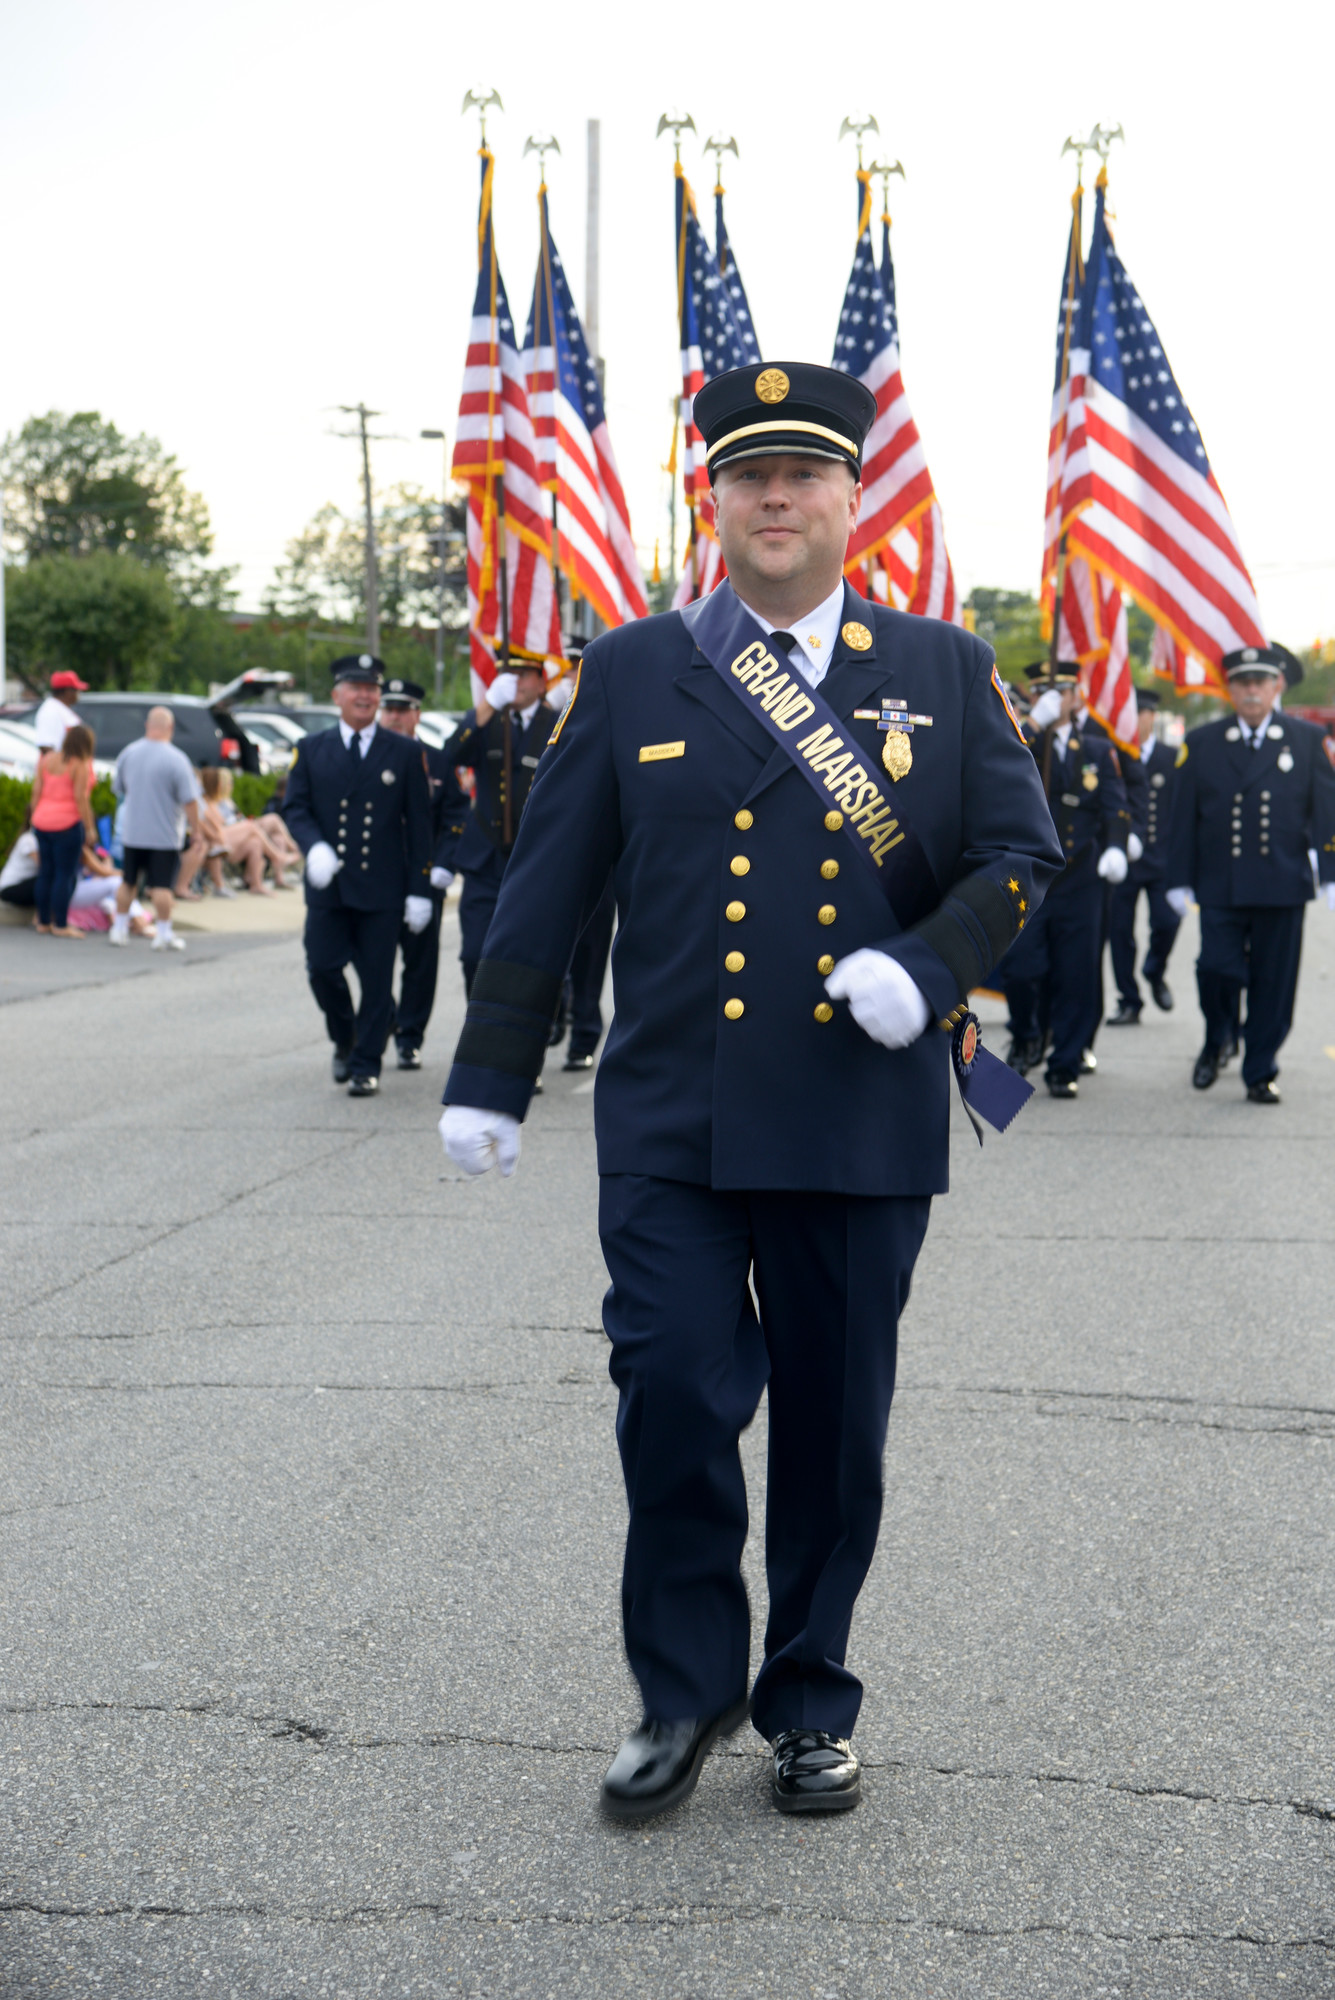 Chief William Madden of the Oceanside Fire Department led the parade as the Grand Marshal.